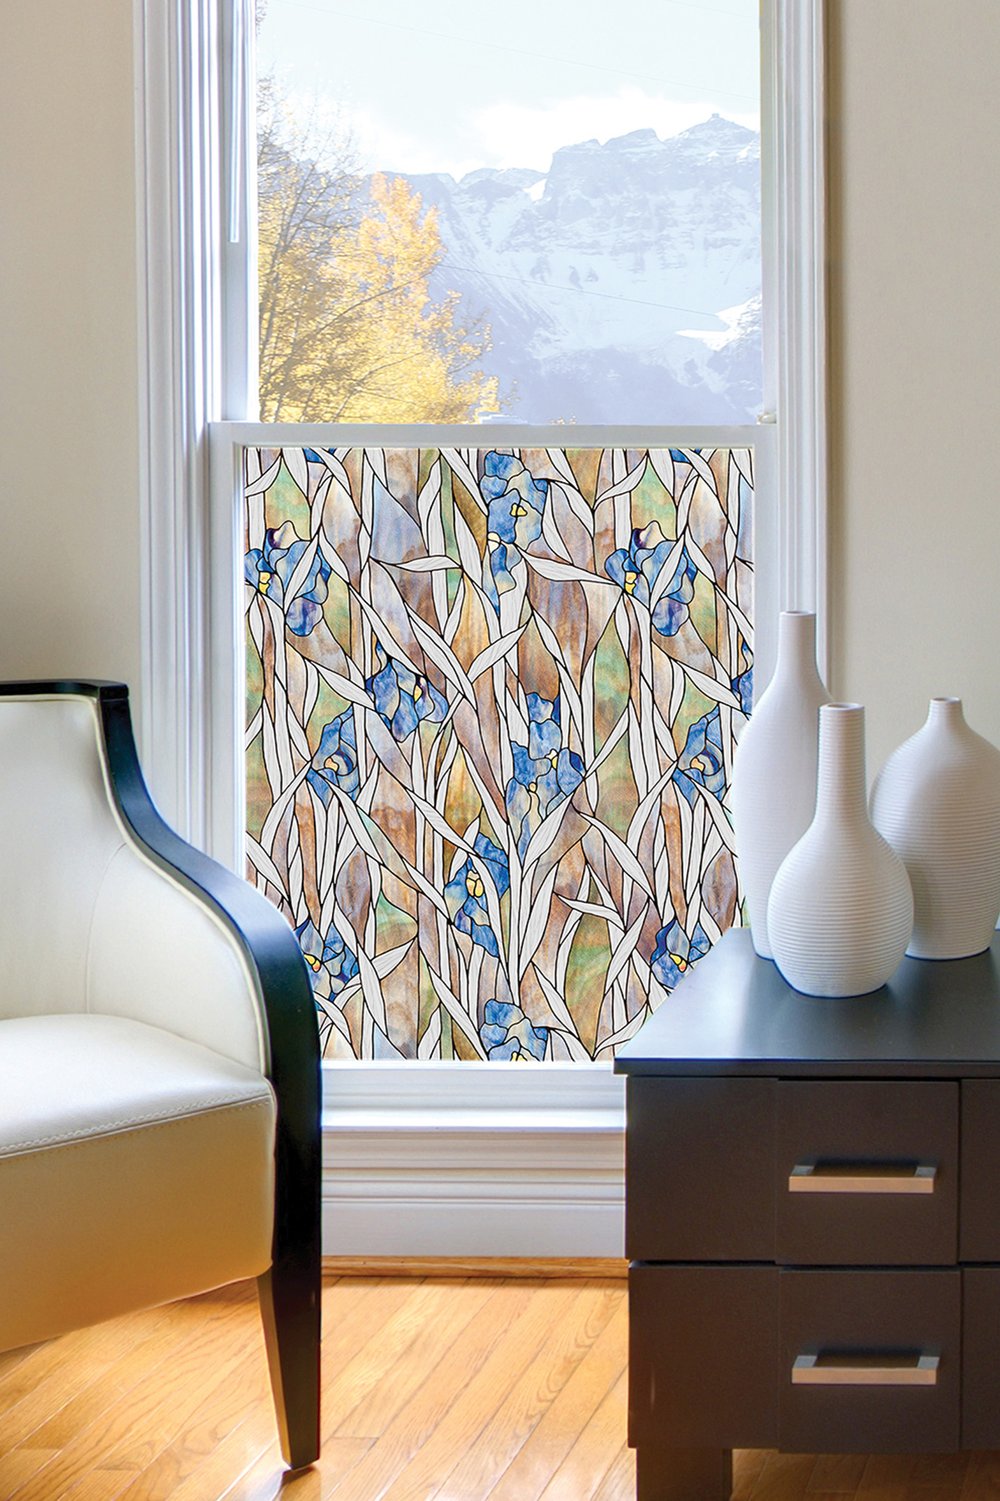 Window Film Ideas to Create Decorative Glass Around Your Home for Less -  Bless'er House